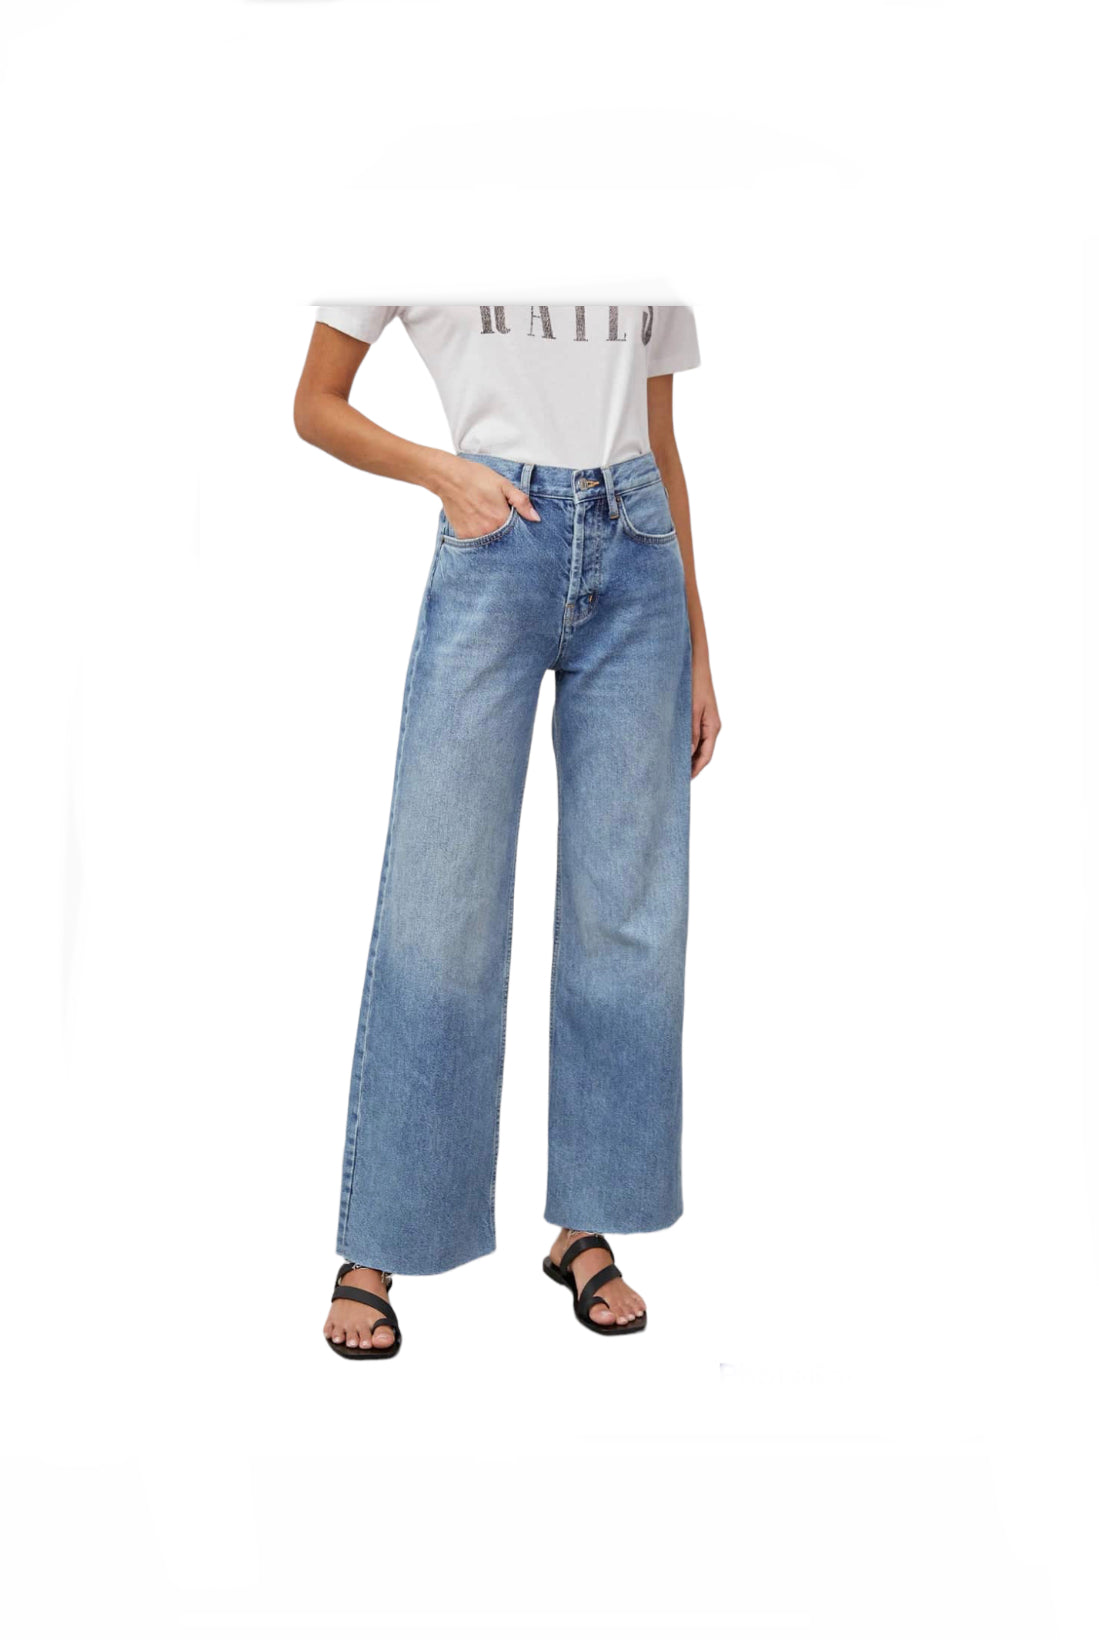 Rails The Getty High Rise Jeans - current season